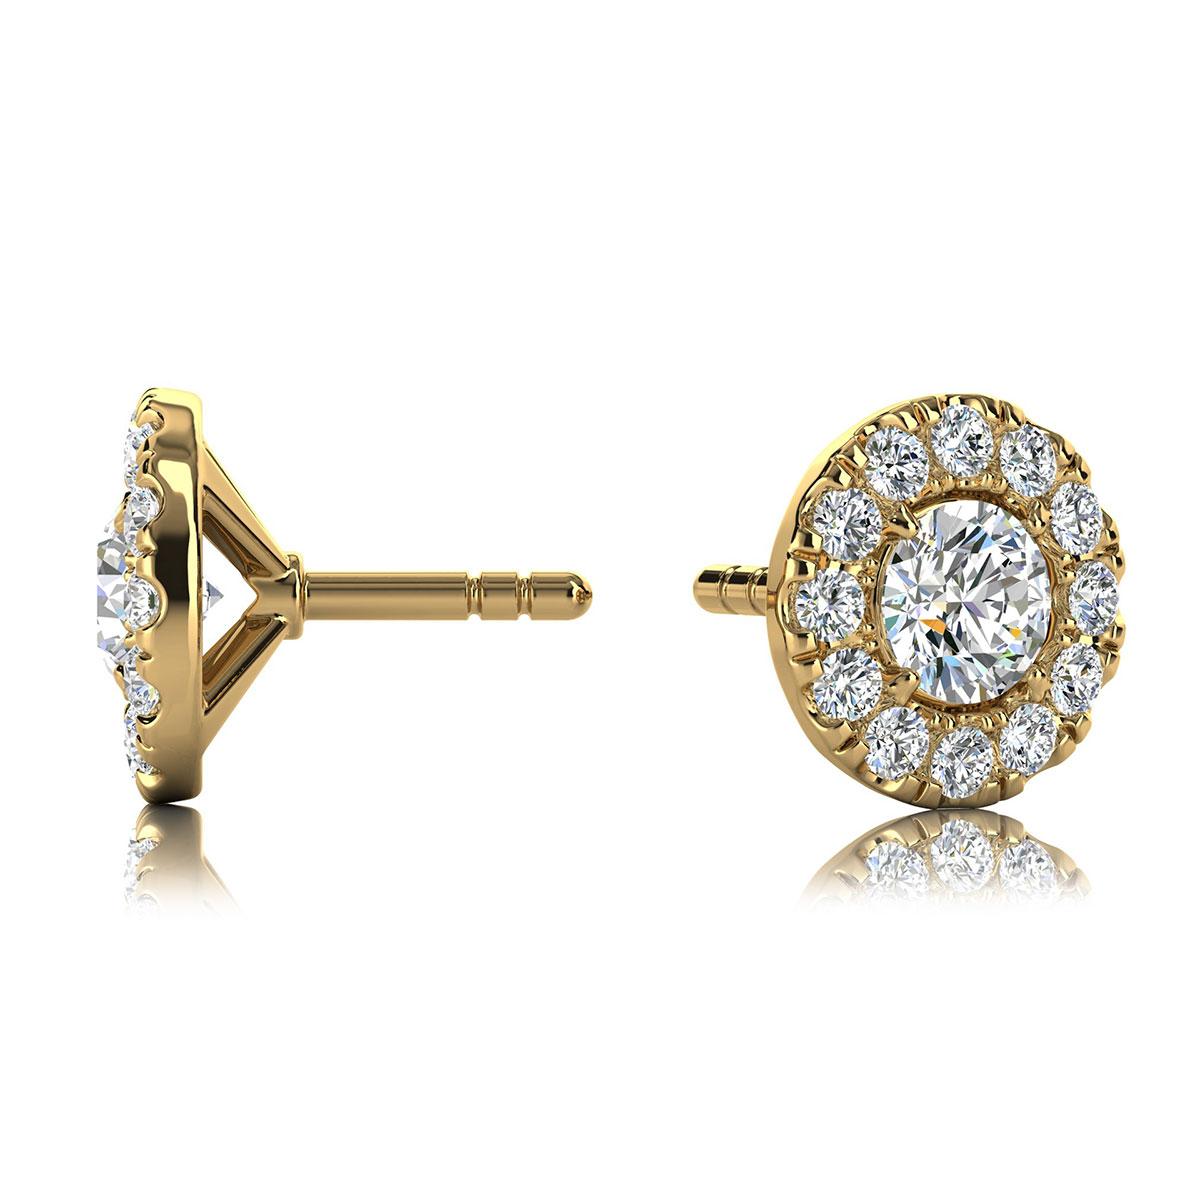 These delicate earrings feature two round shaped diamonds that are approximately 0.30-carat total weight (3.3mm) encircled by a halo of perfectly matched 32 round brilliant diamonds in about 0.20-carat total weight. The earrings are measuring at 6.7